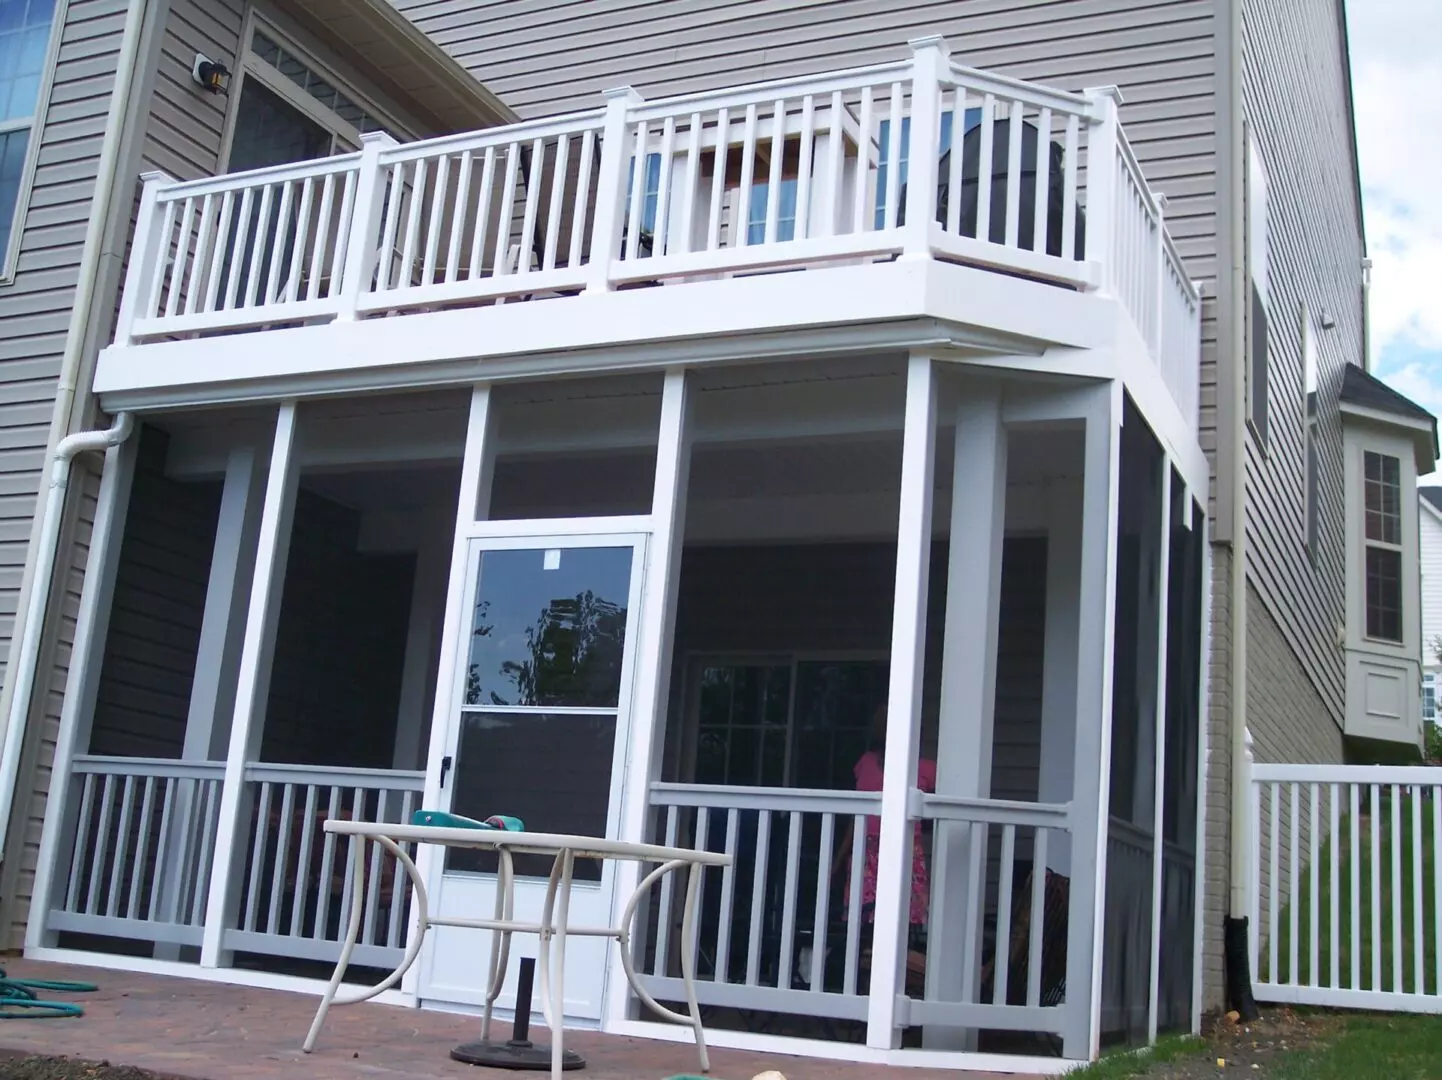 Elevated white wooden deck on top of an enclosed space